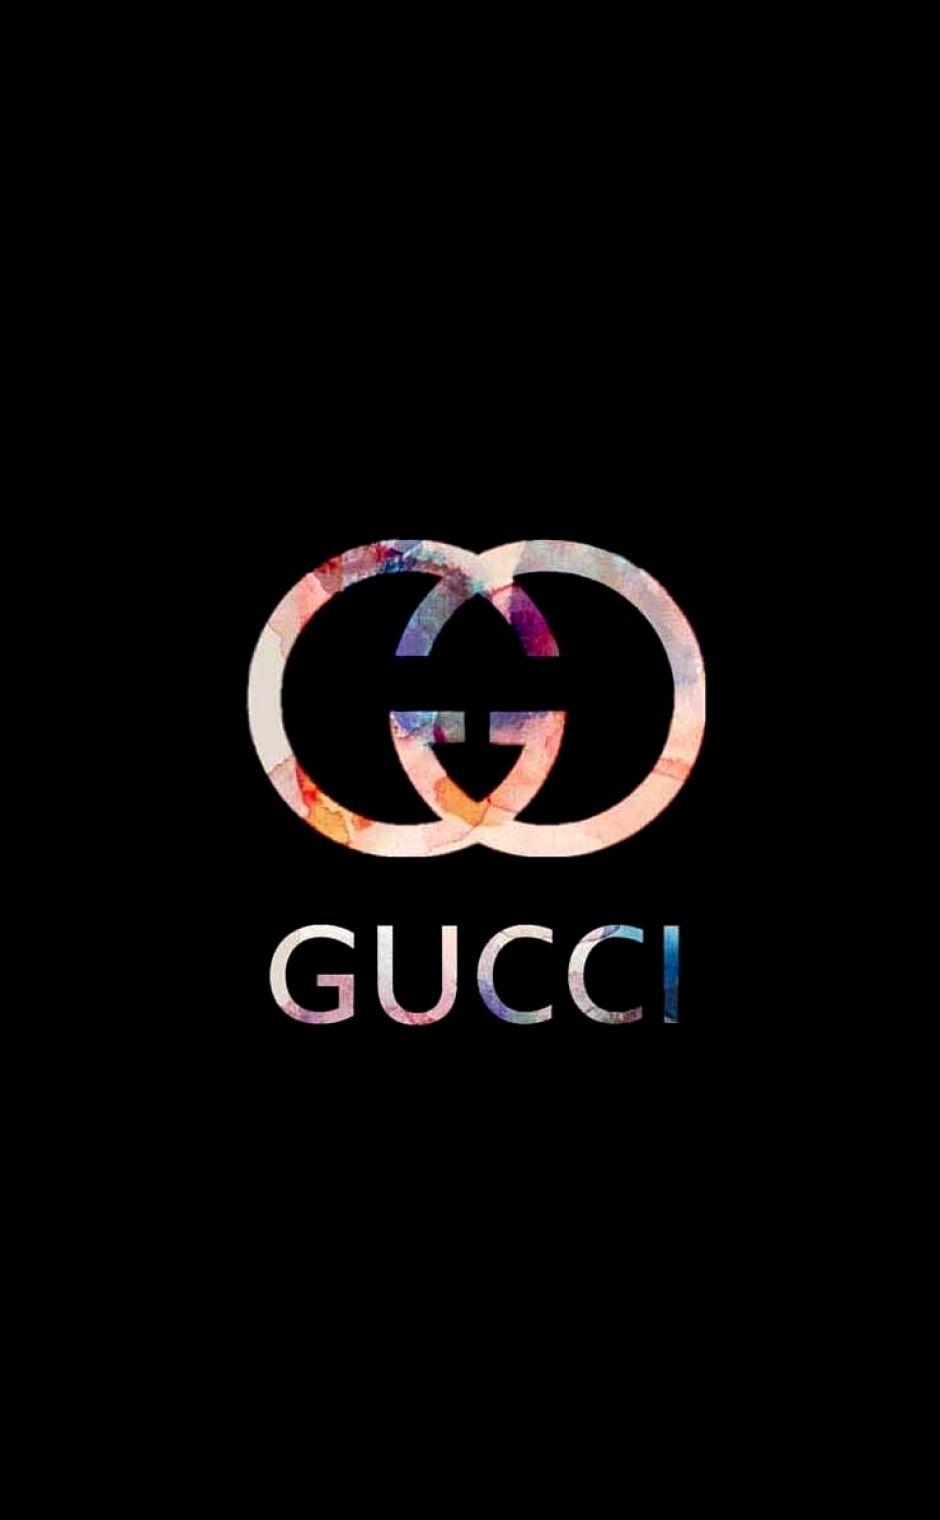 Gucci Apple Wallpapers - Gucci Apple Backgrounds WallpaperAccess